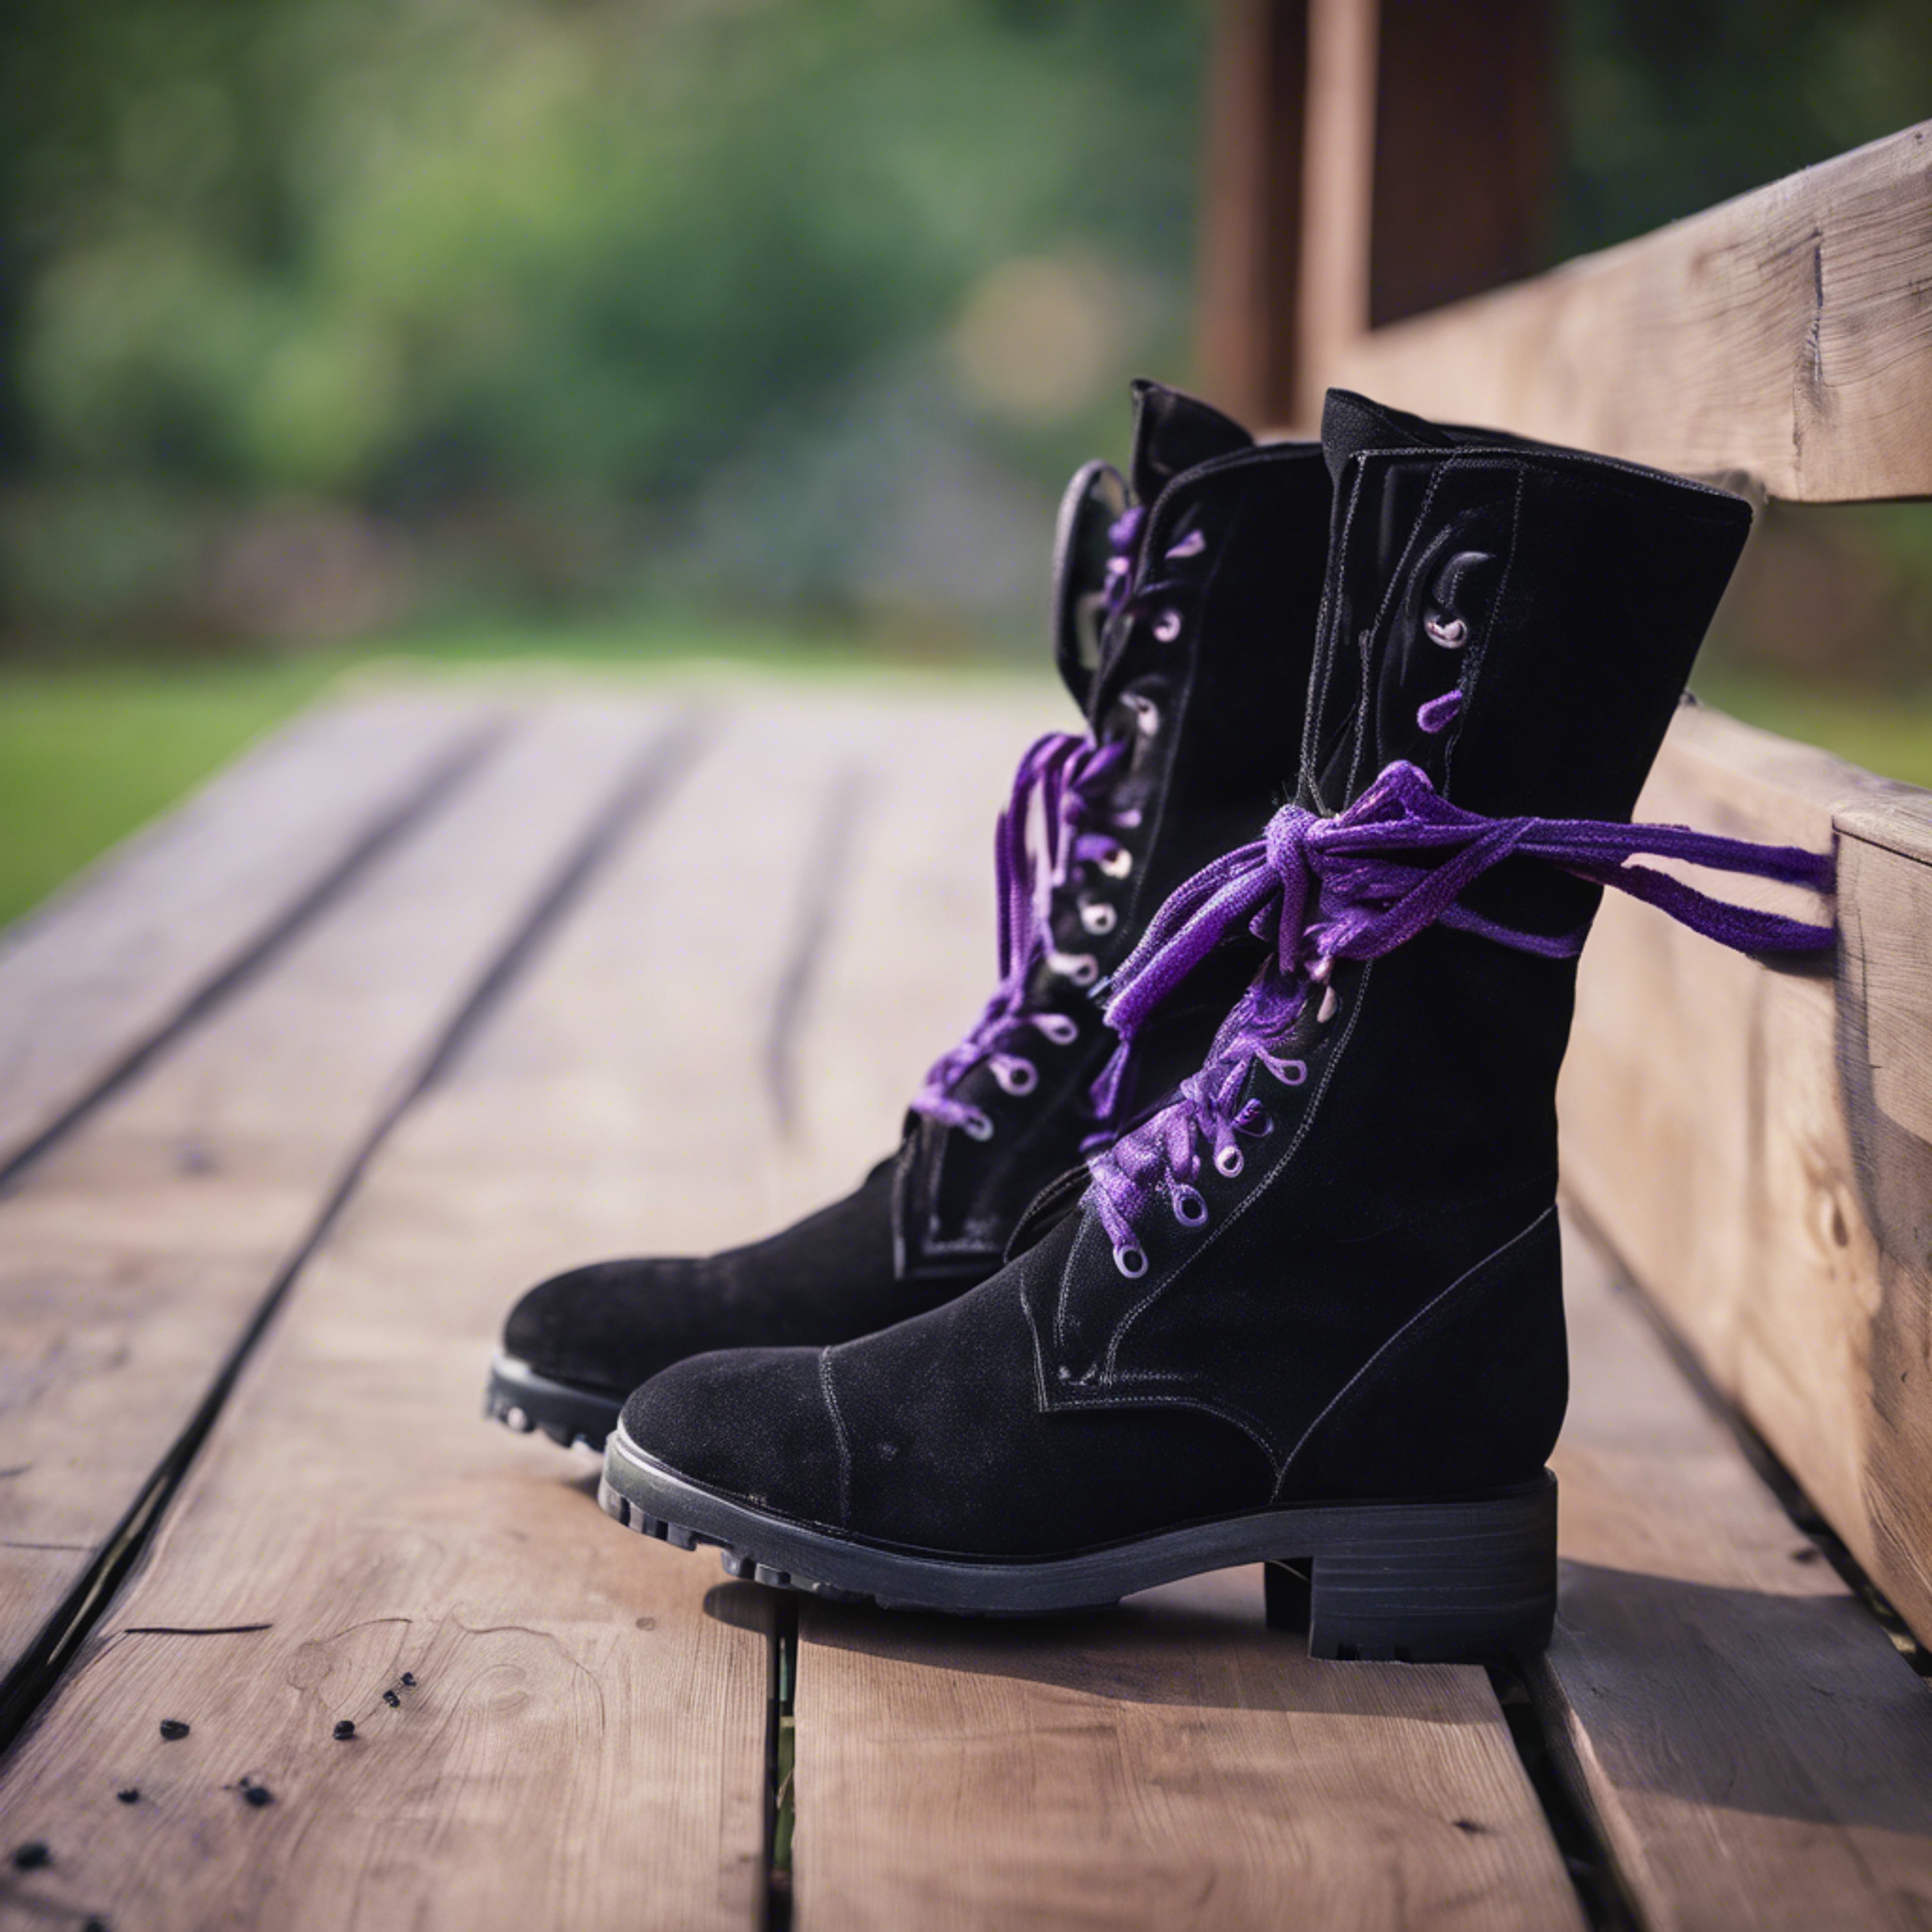 A pair of black suede boots with purple laces left casually on a wooden porch. Tapeta[fedd81ee4b6b40088ba0]